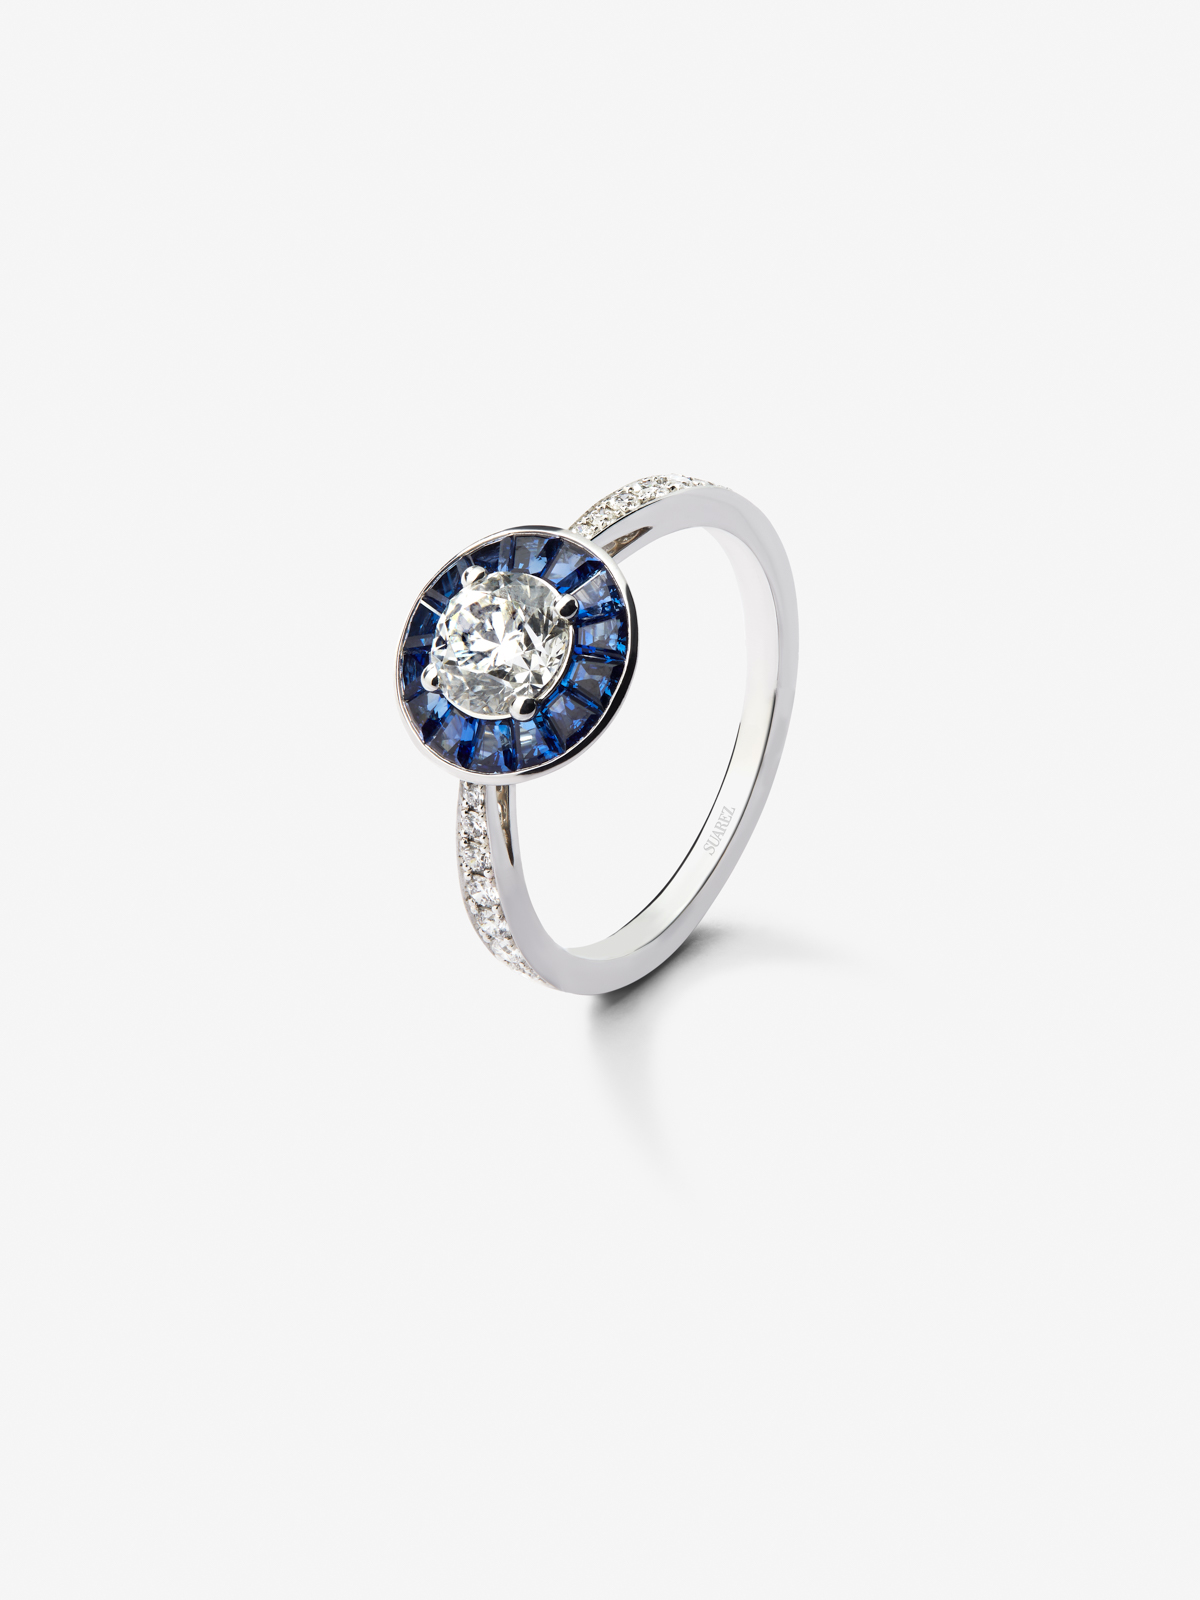 18K White Gold Ring with Blue Zafiros in Trapecio Size of 0.67 Cts and Bright Size of 0.88 CTS